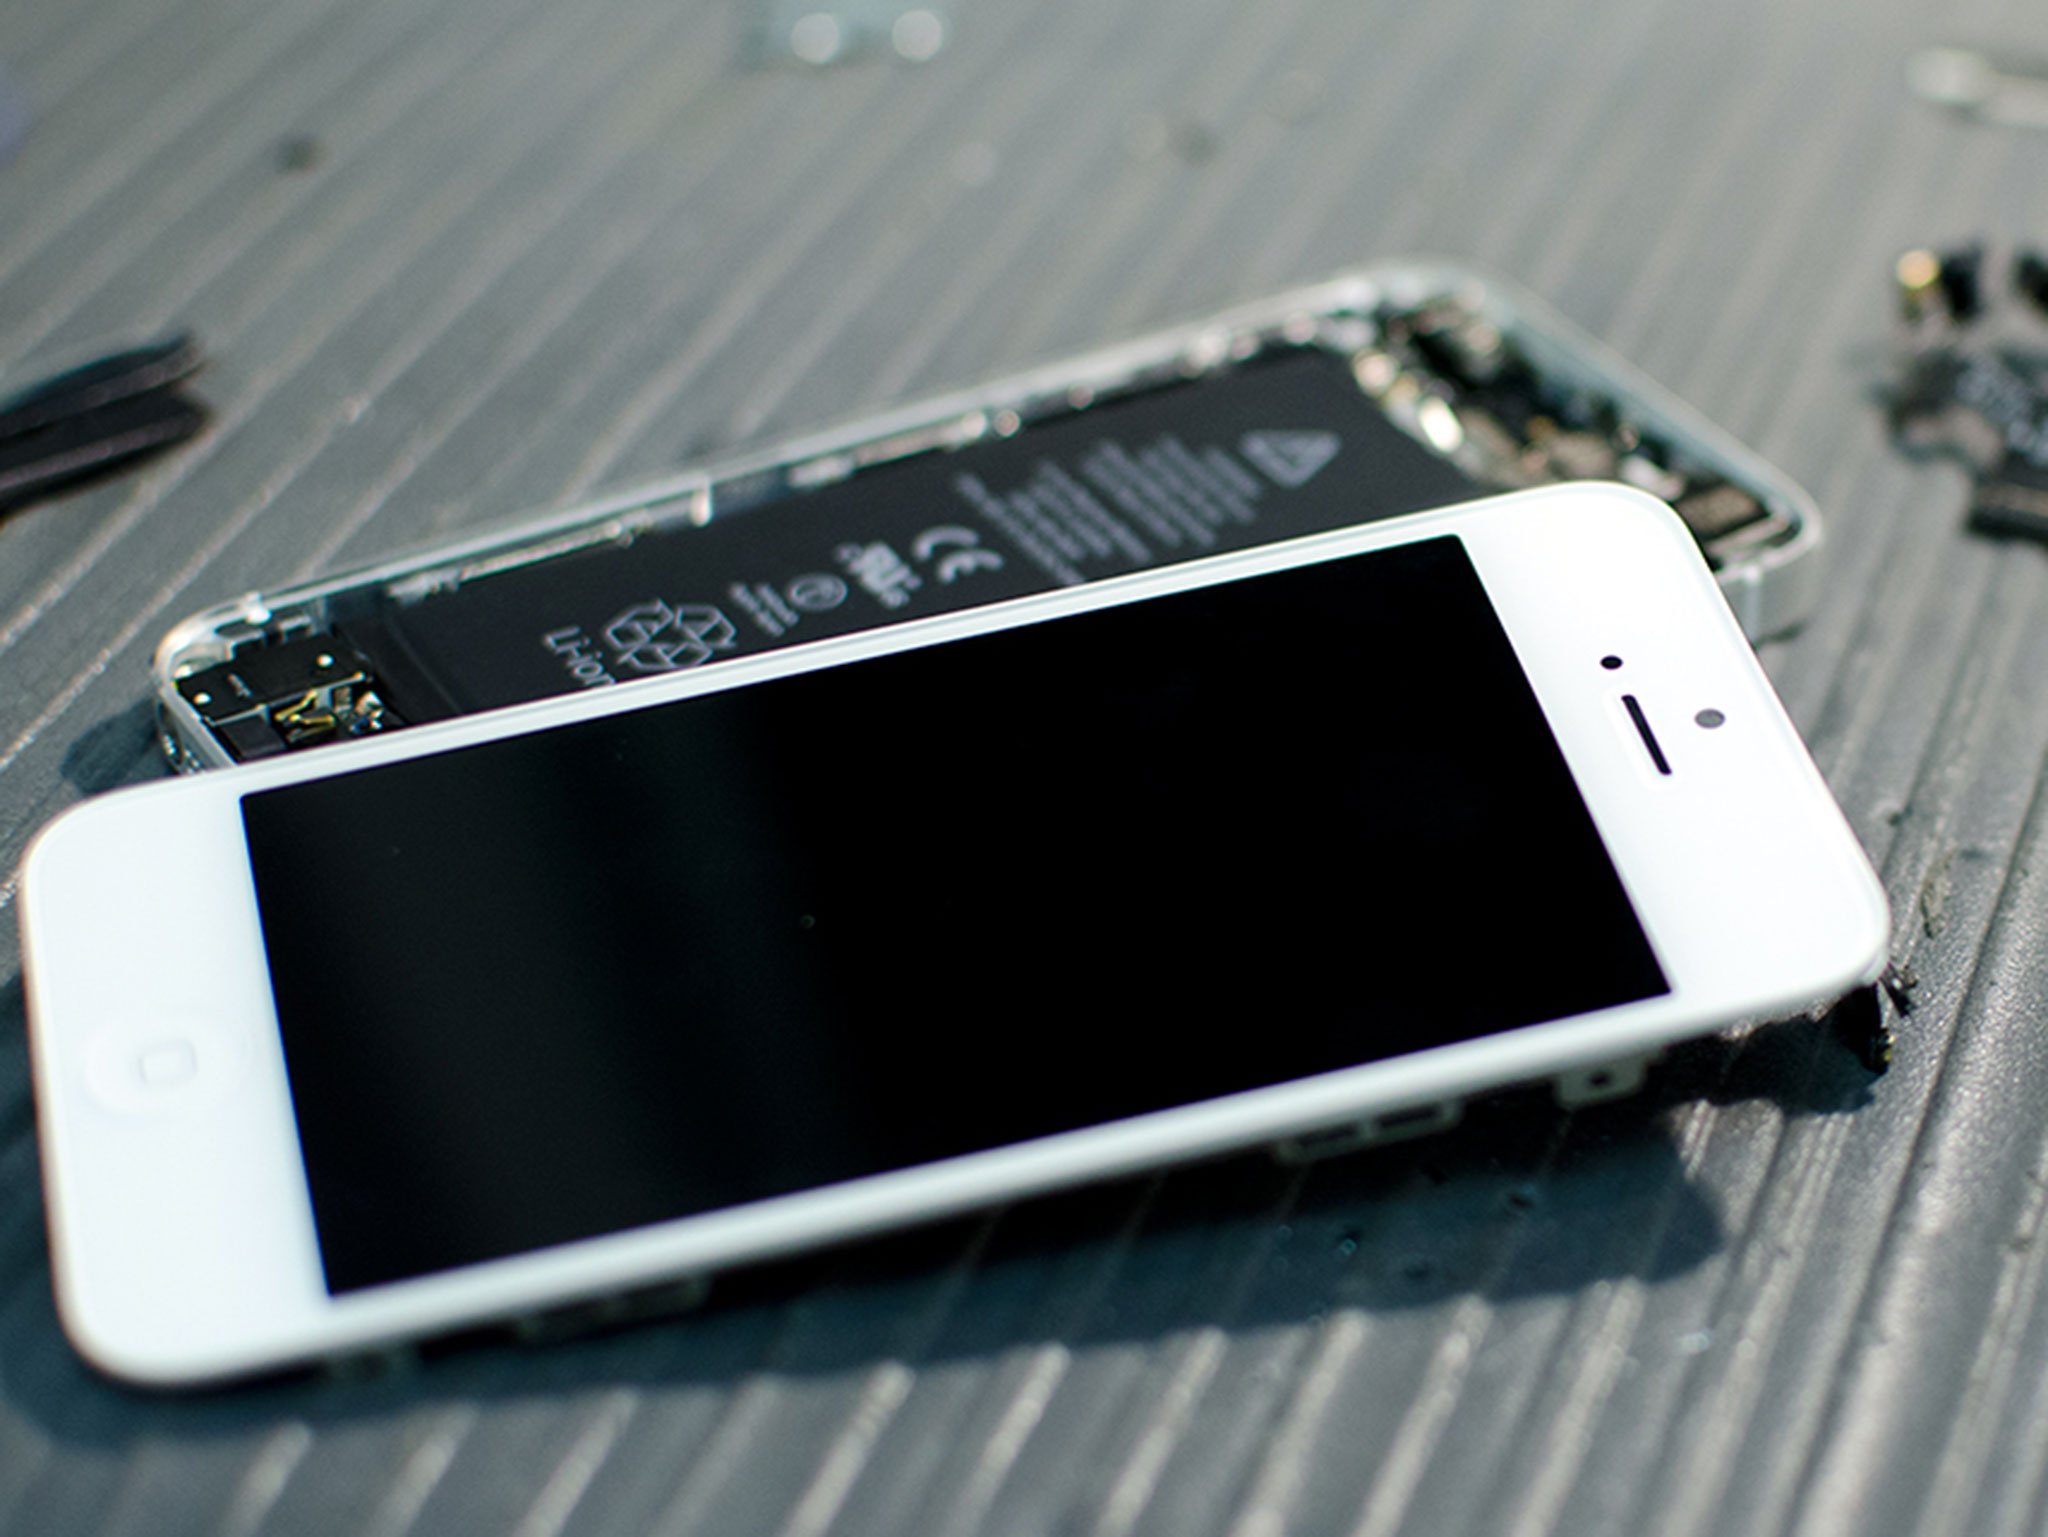 How to replace a cracked or unresponsive screen on an iPhone 5